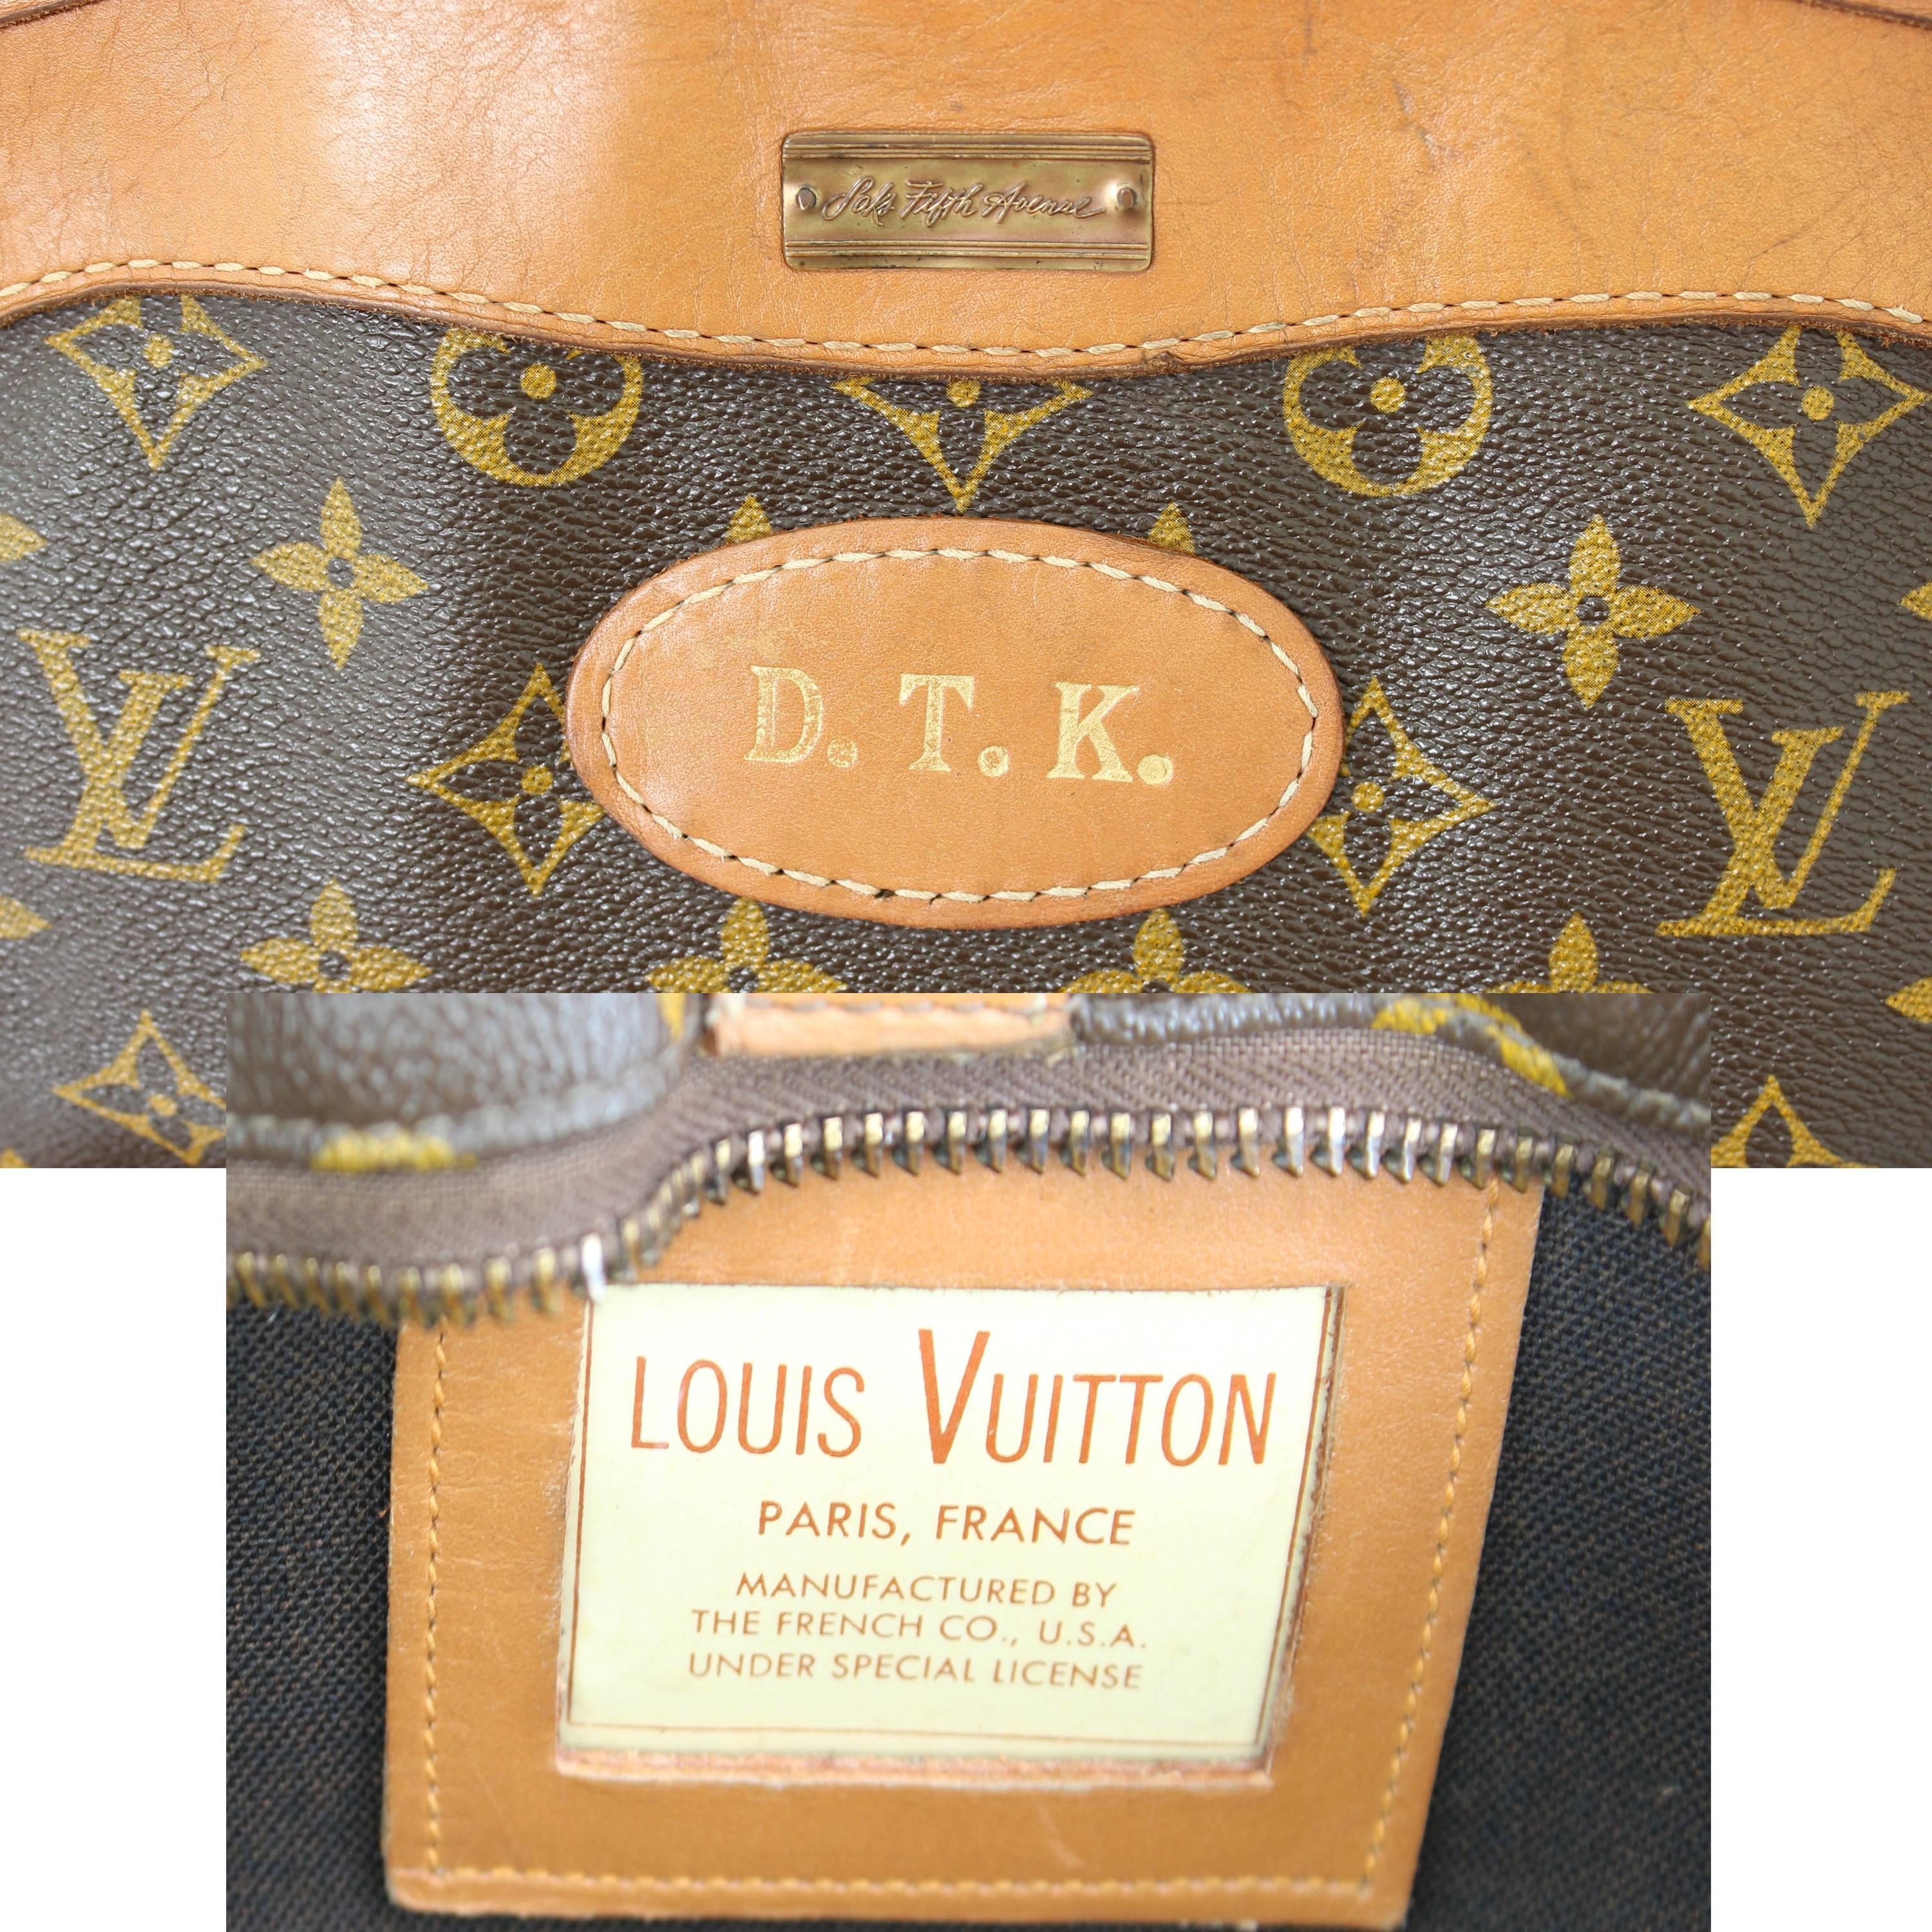 Louis Vuitton Carry On Bag Luggage Tote Monogram Canvas French Co. Saks 70s 5